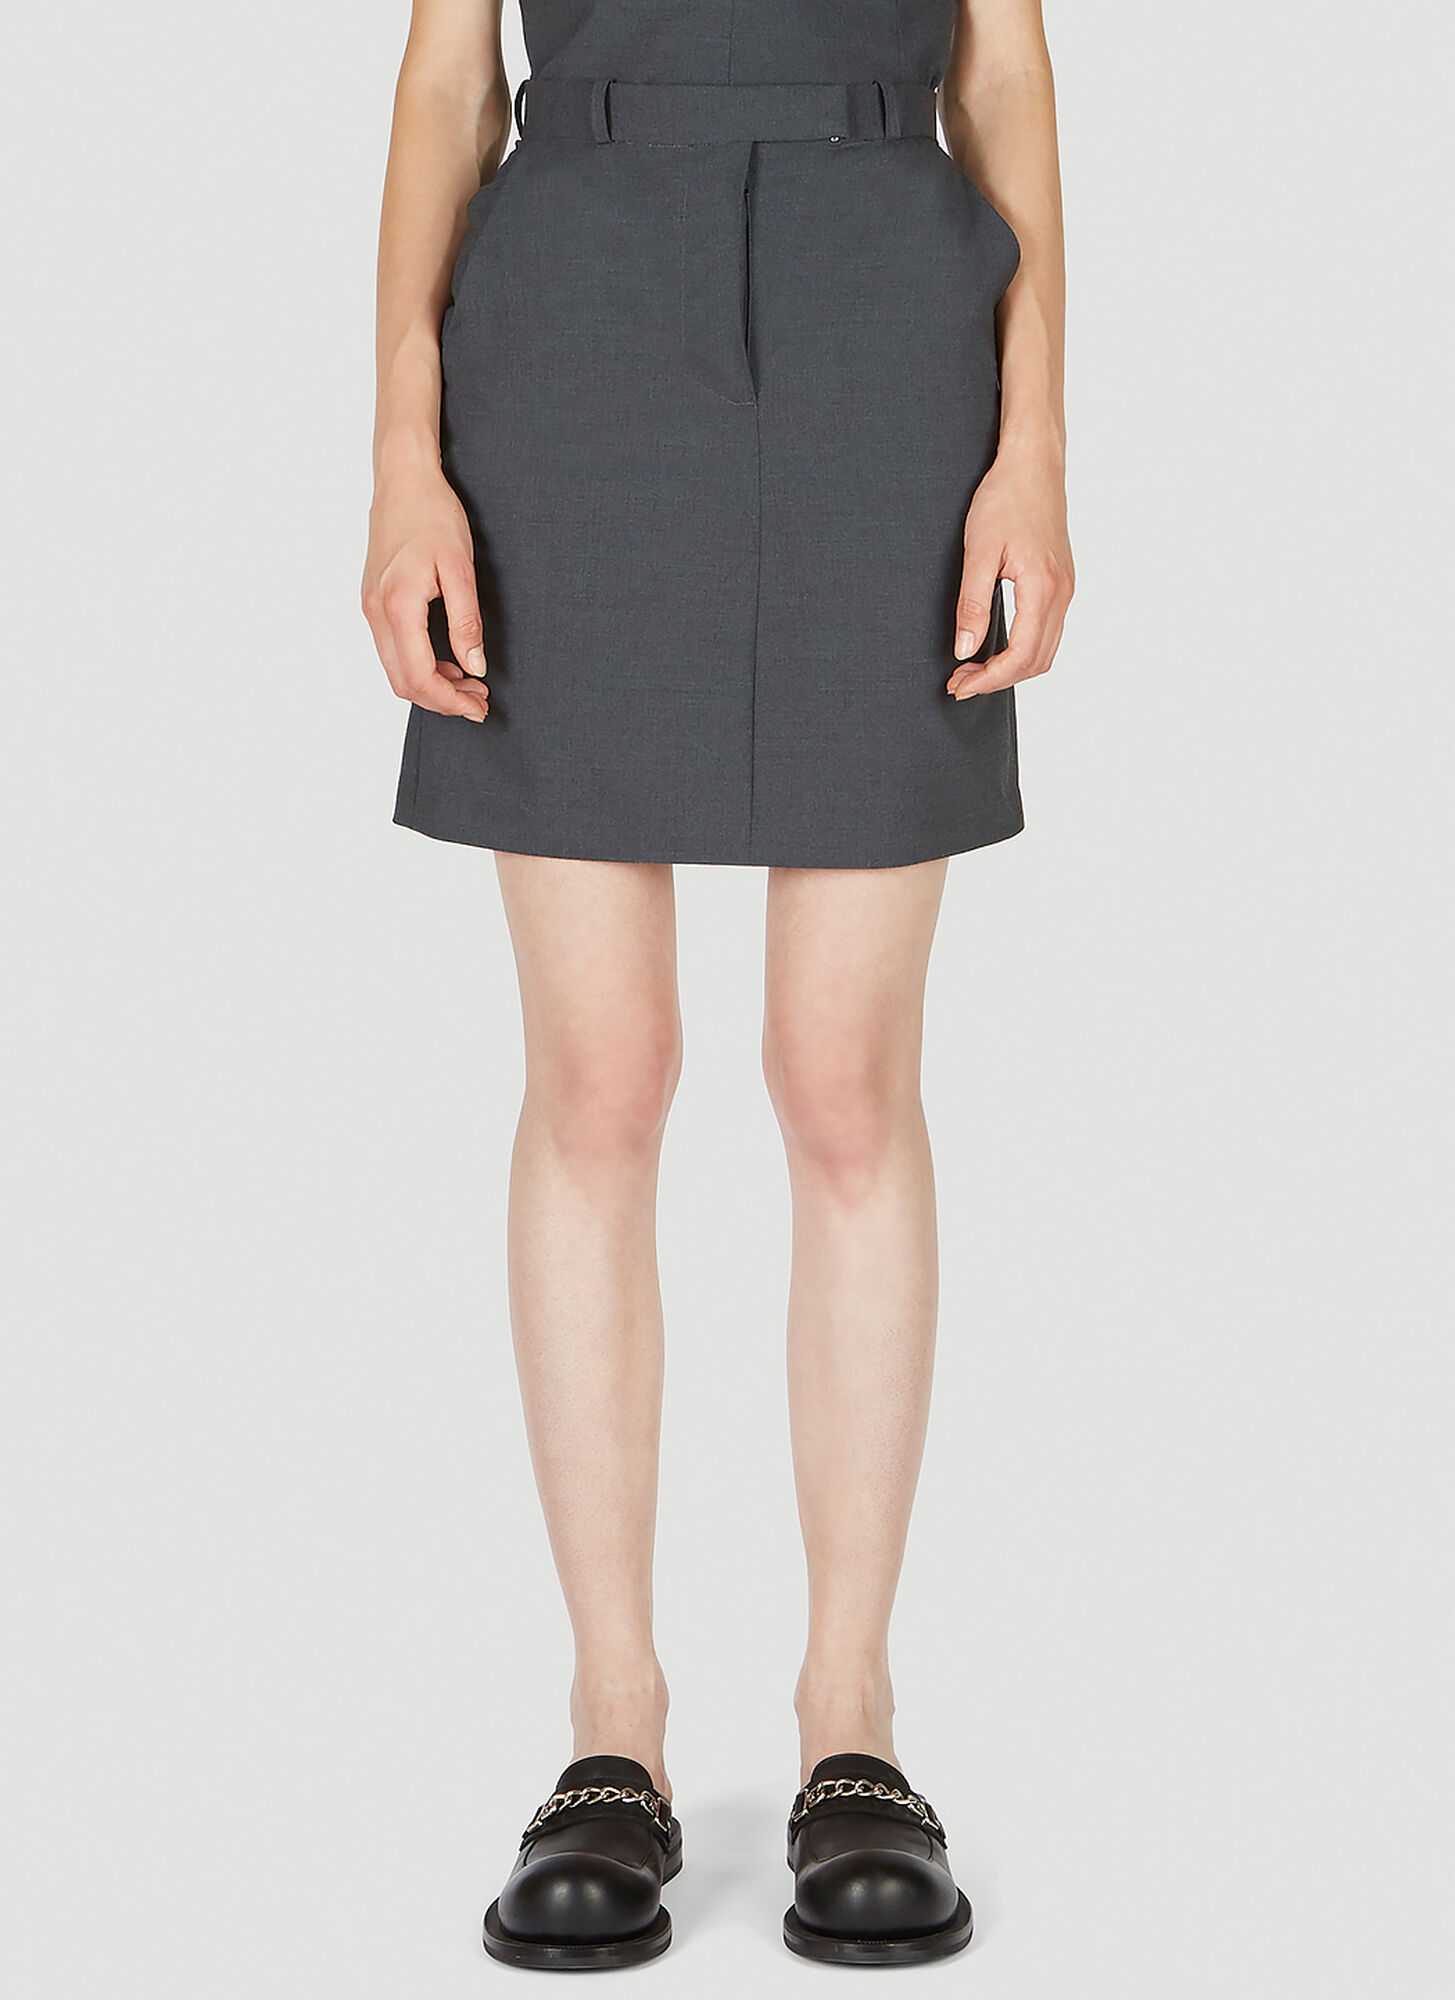 MARTINE ROSE PULLED TAILORED SKIRT